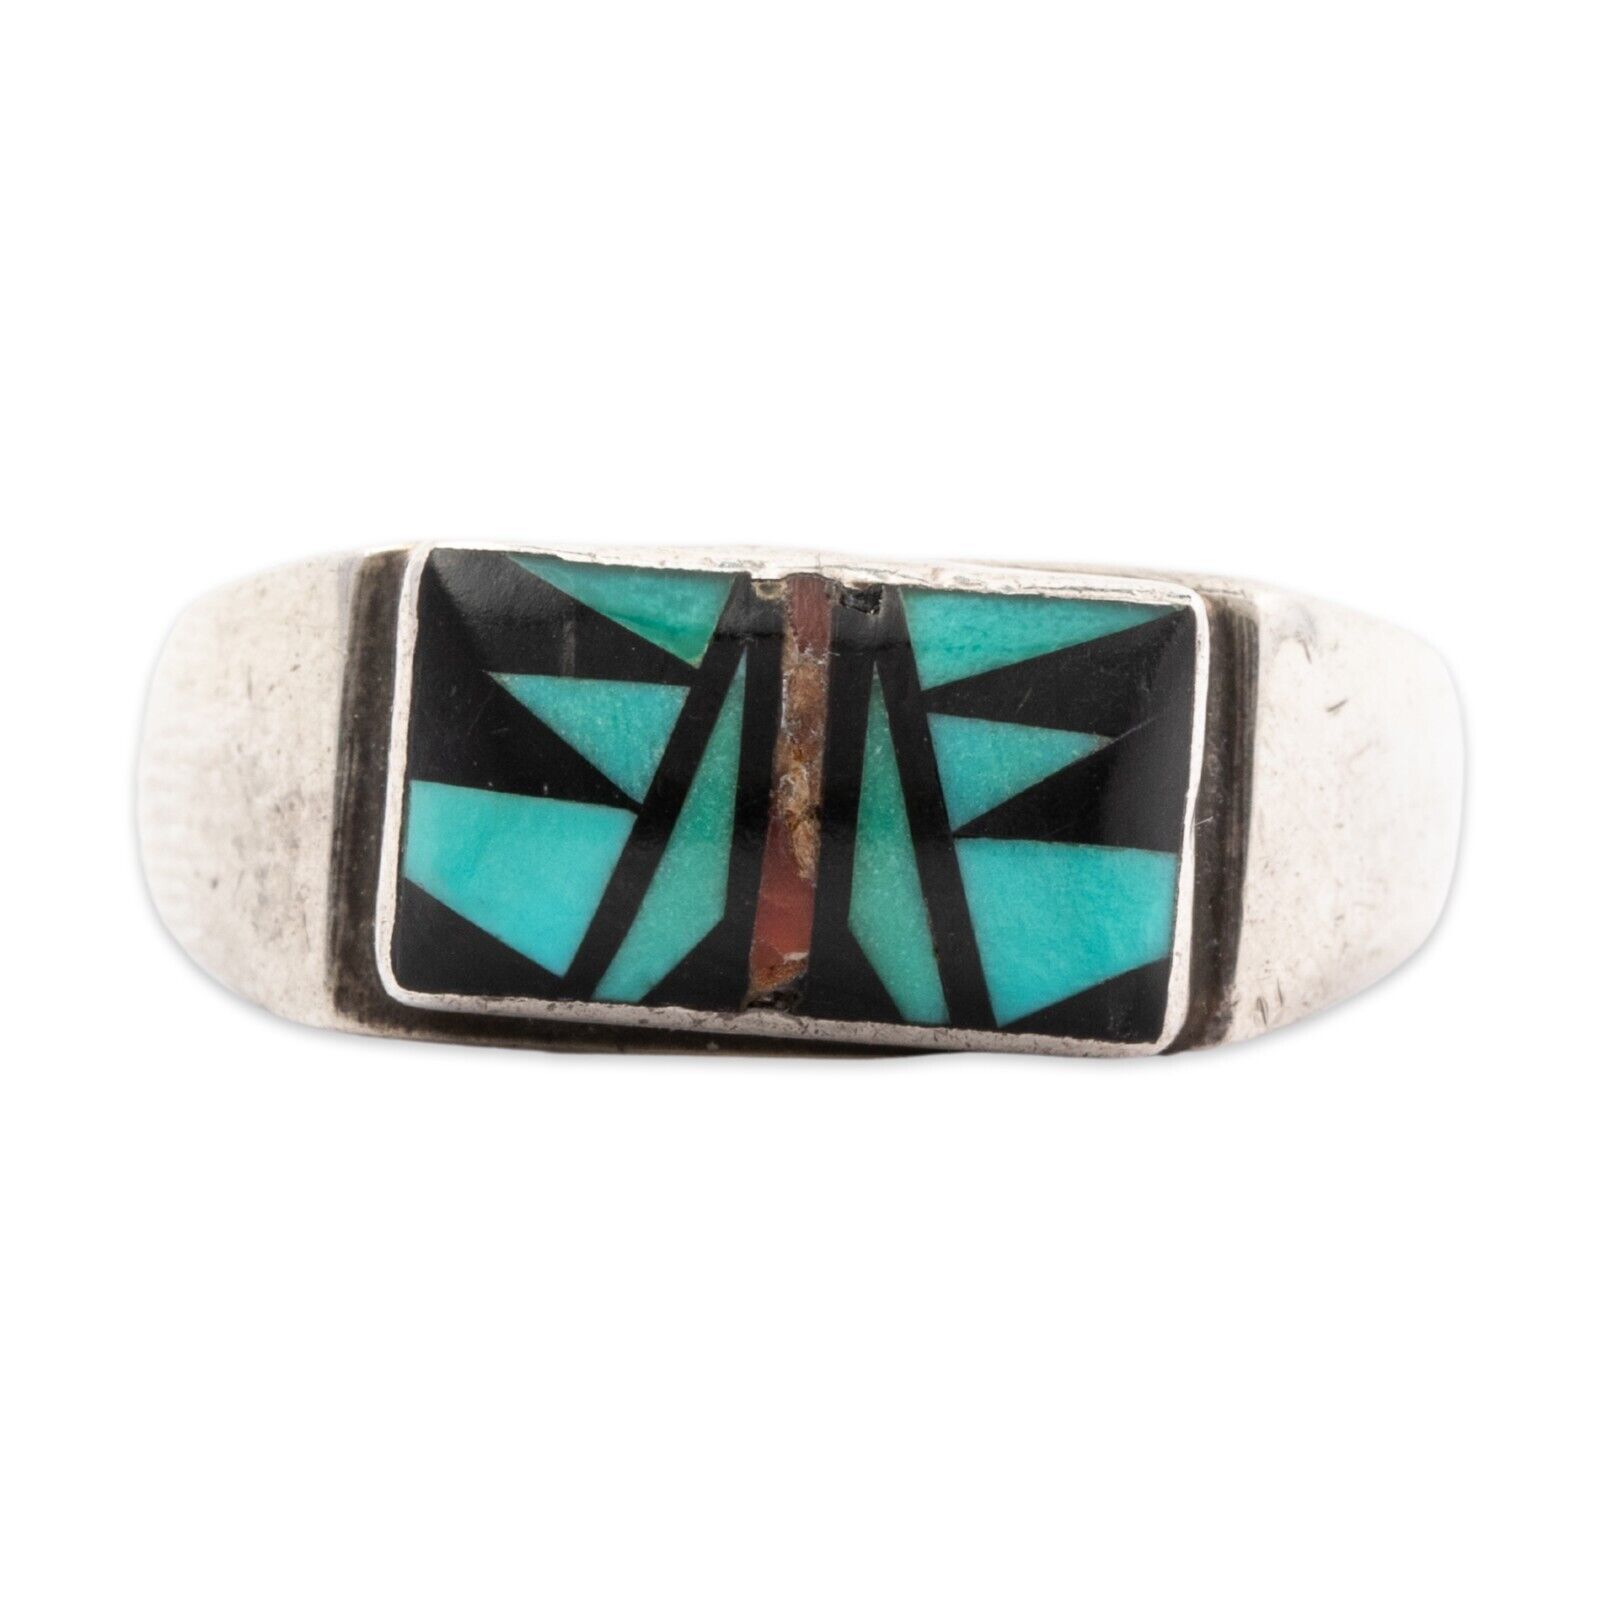 LARGE NATIVE AMERICAN STERLING SILVER TURQUOISE CORAL ONYX INLAY RING 13